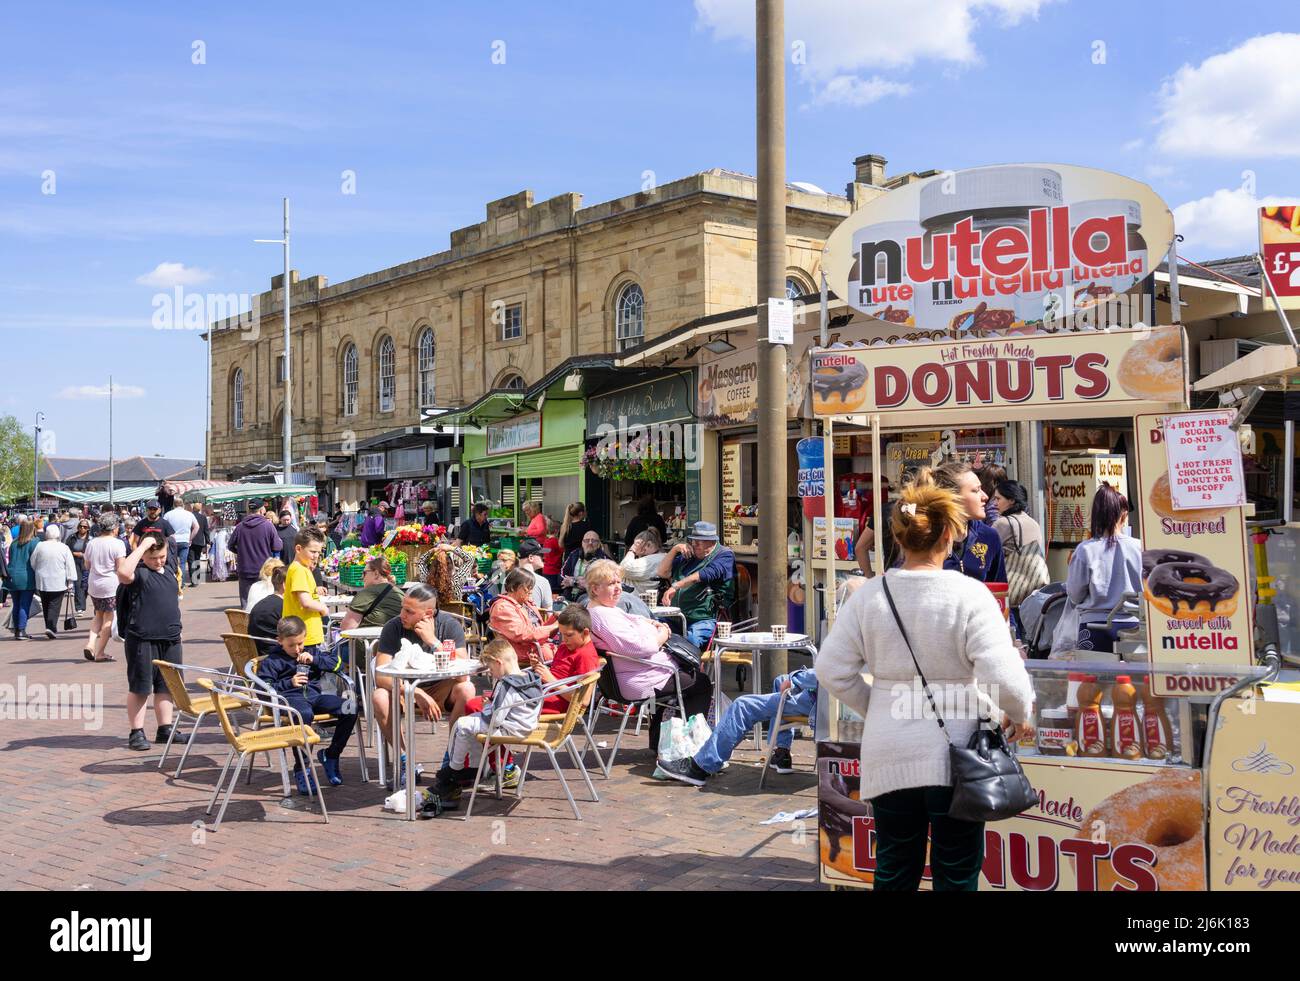 Stall selling fresh Donuts on Doncaster market place Doncaster South Yorkshire England  UK GB Europe Stock Photo